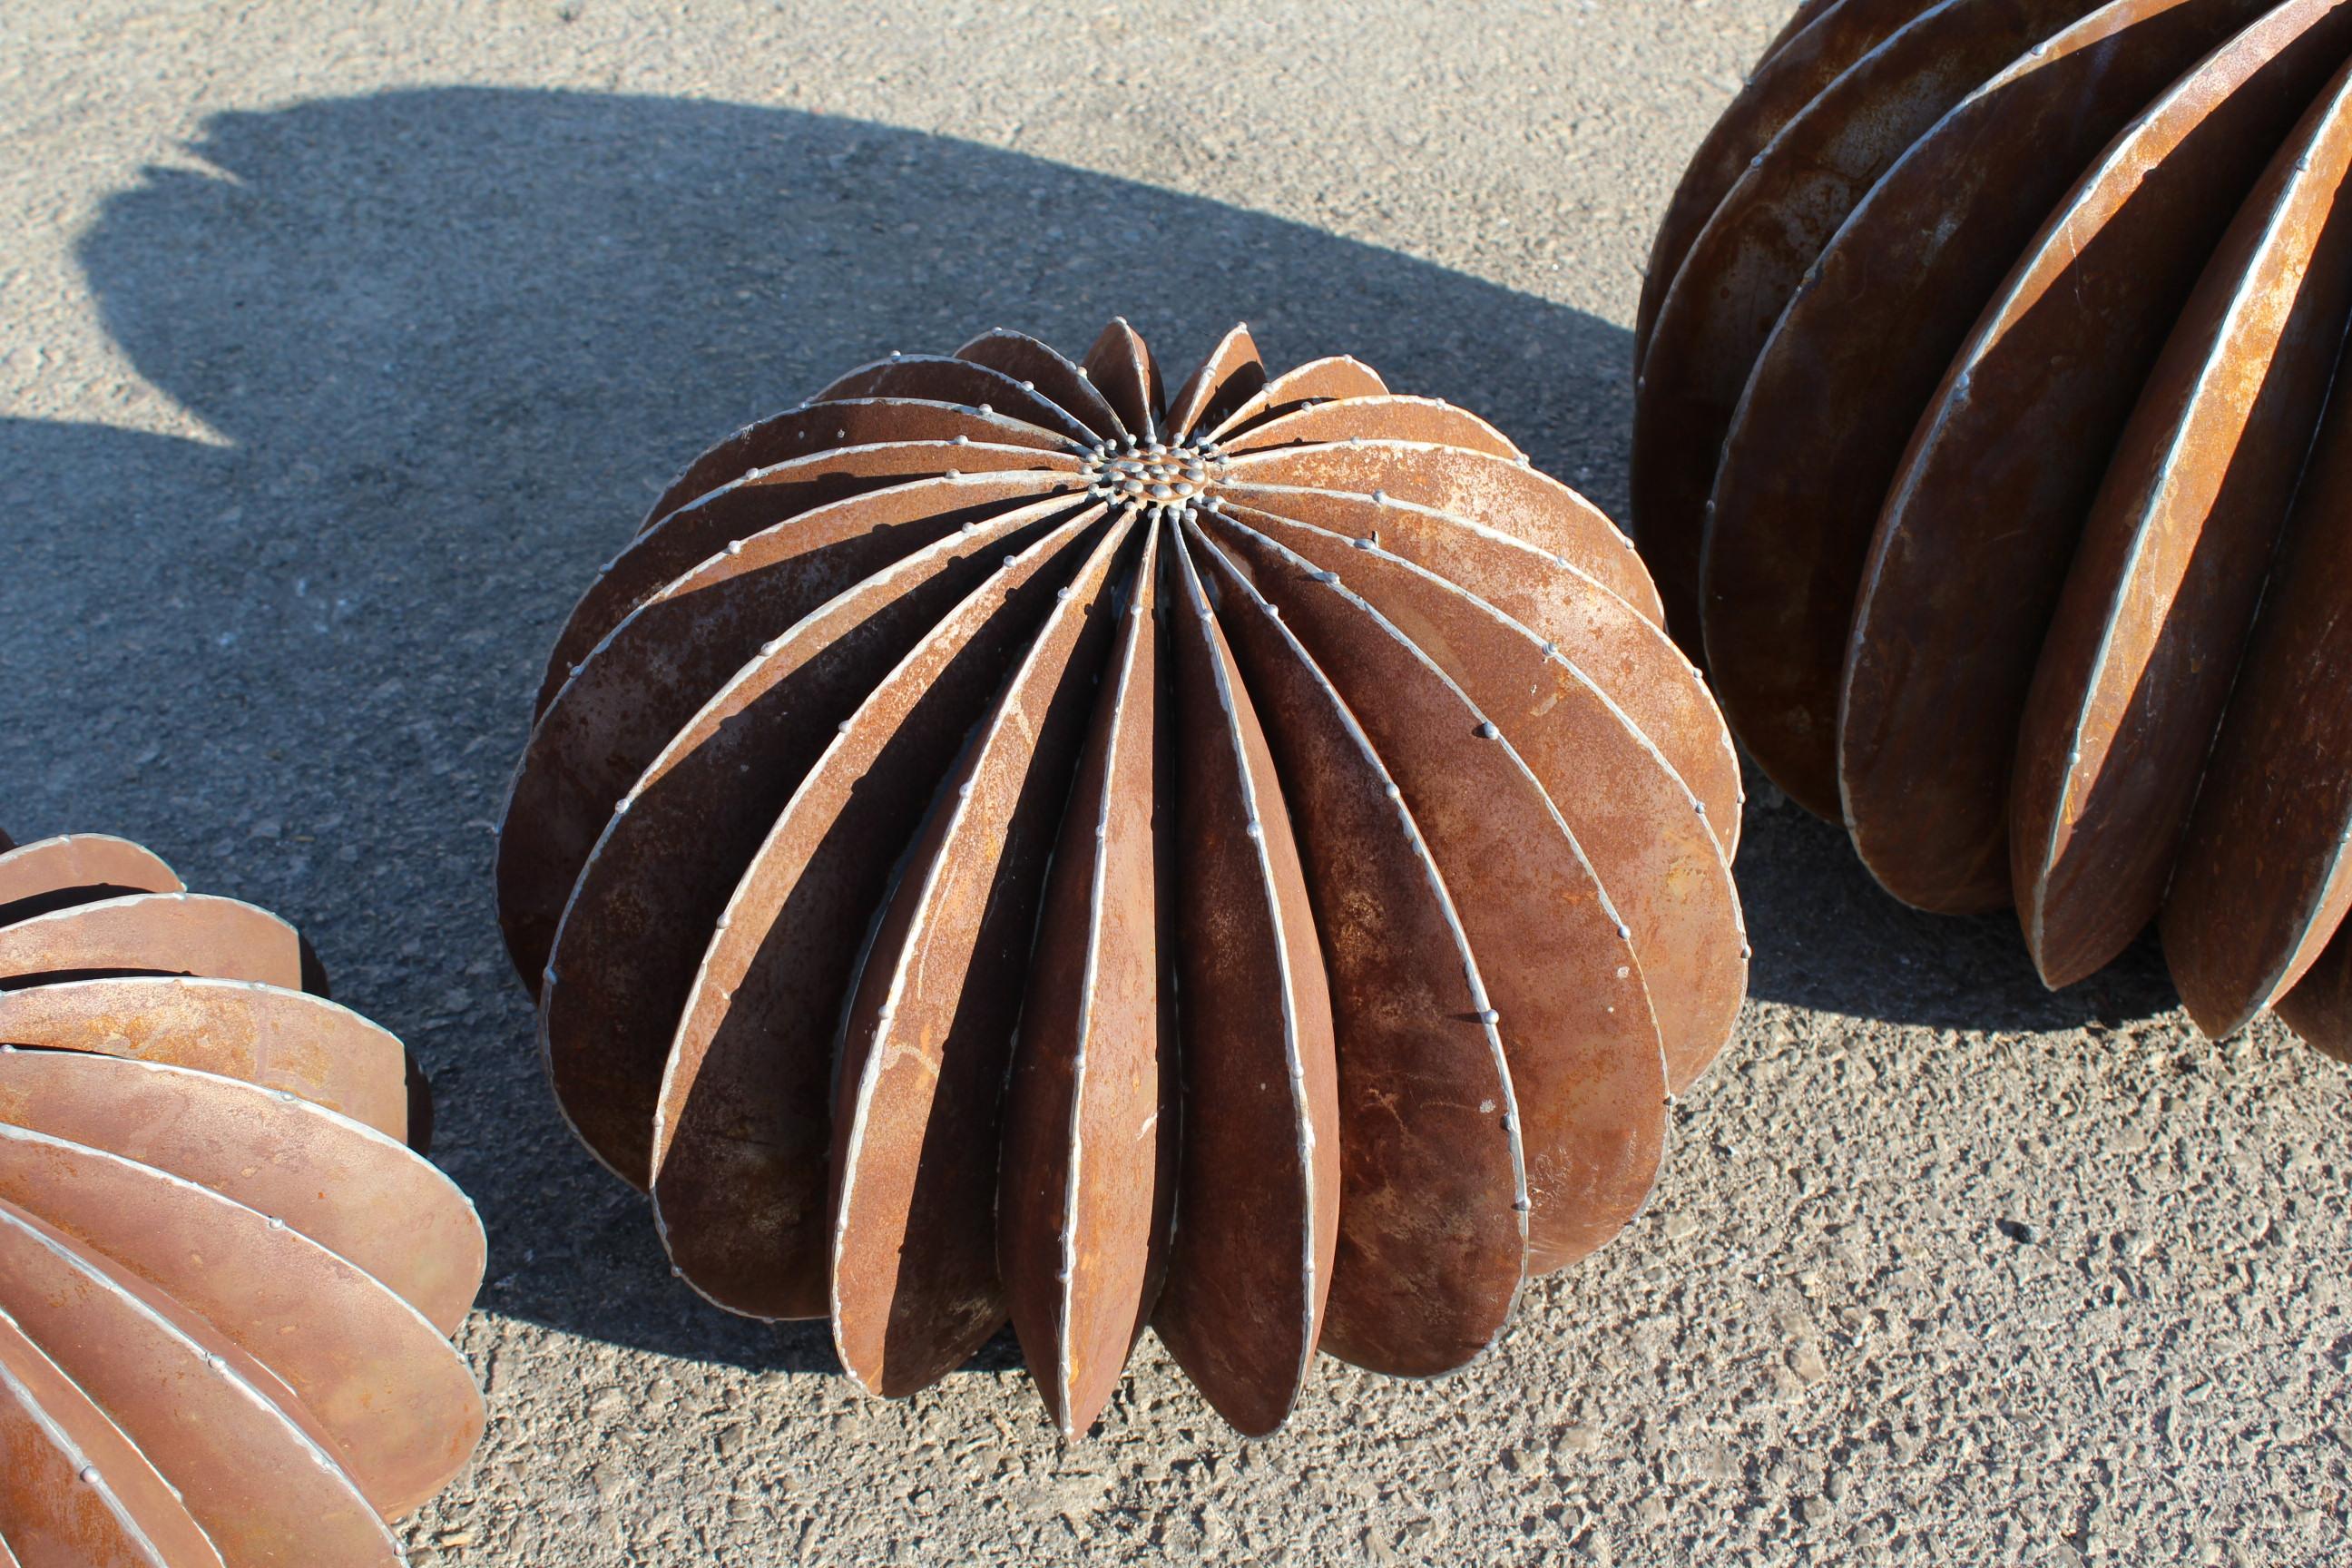 Set of Iron Ball Cactus Sculptures in Different Sizes 1